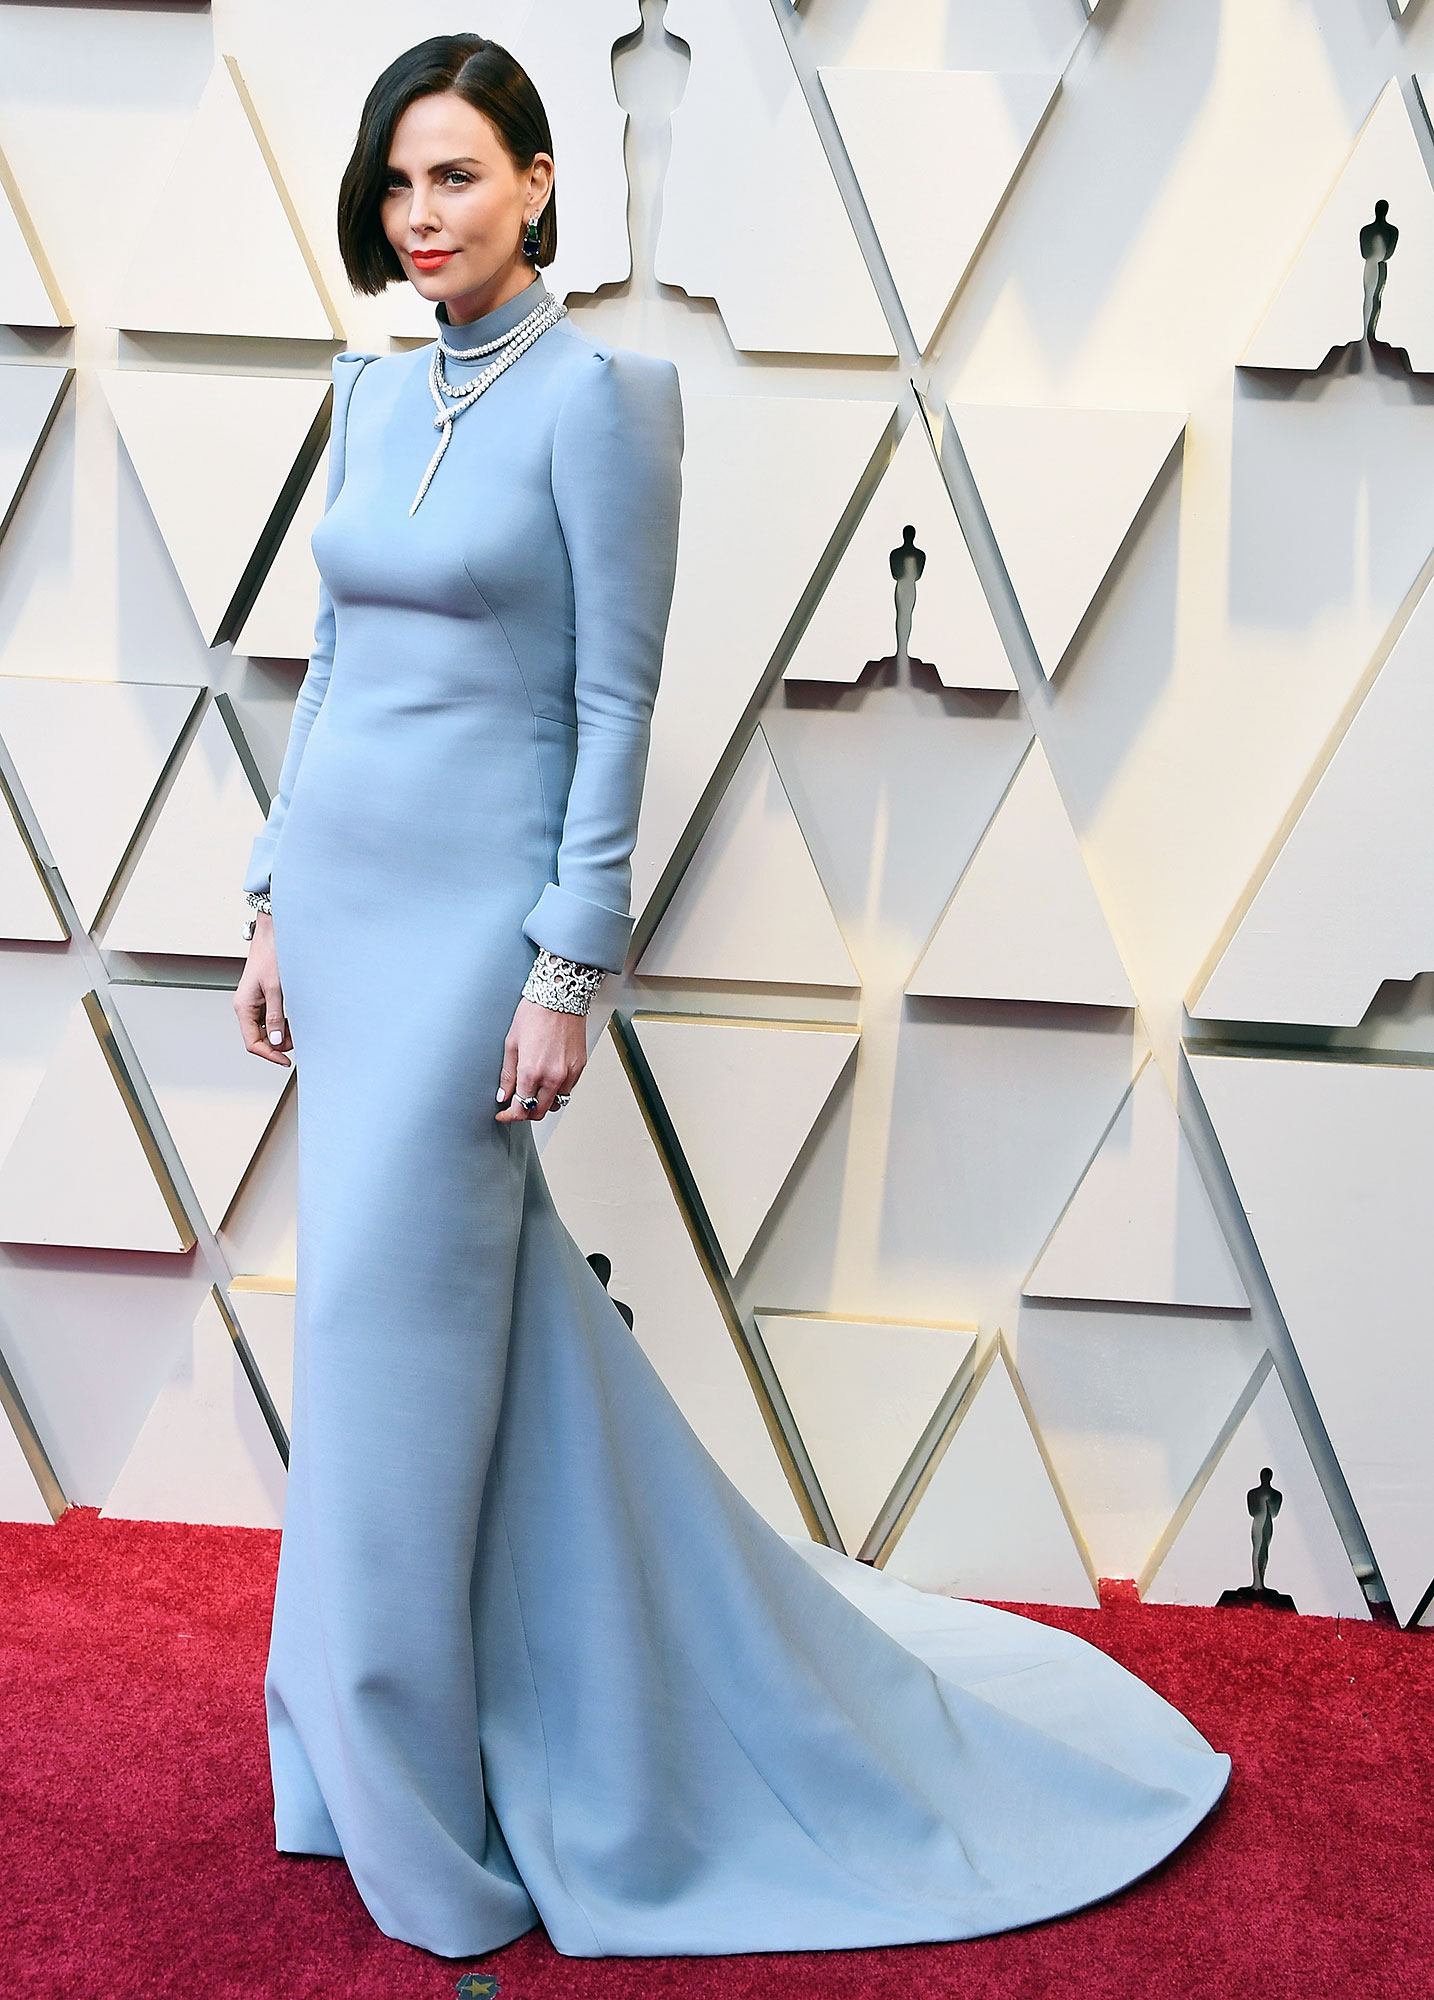 Oscars 2019 Best Dressed Top Red Carpet Gowns, Dresses